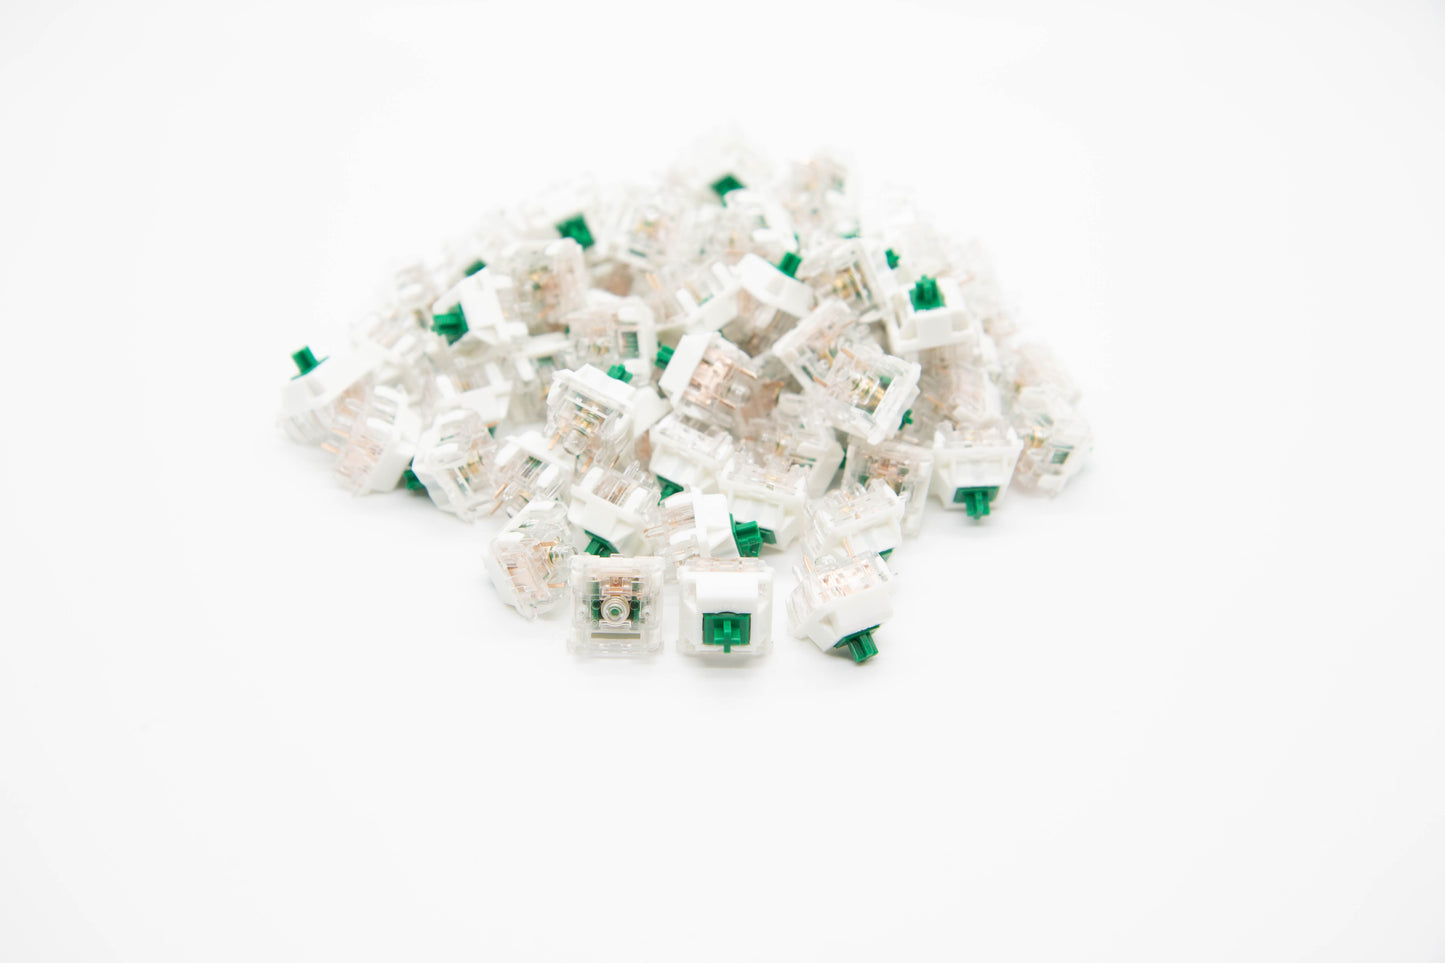 Close up shot of a pile of BBN Linear mechanical keyboard switches featuring white and transparent housing and green stems